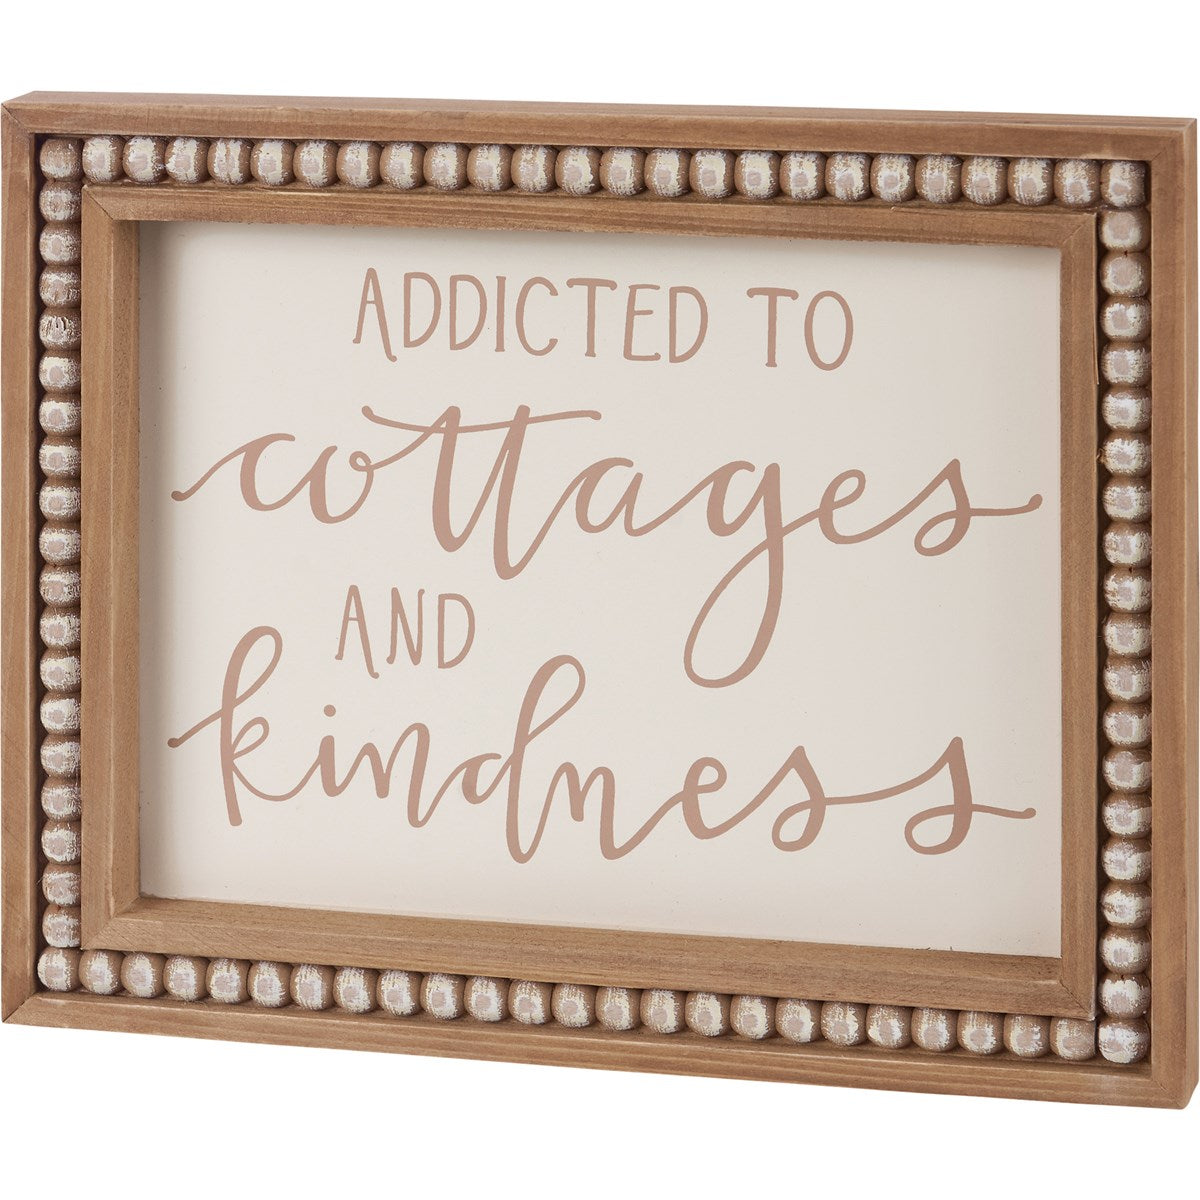 Surprise Me Sale 🤭 Addicted To Cottages and Kindness Framed 10" Wall Art